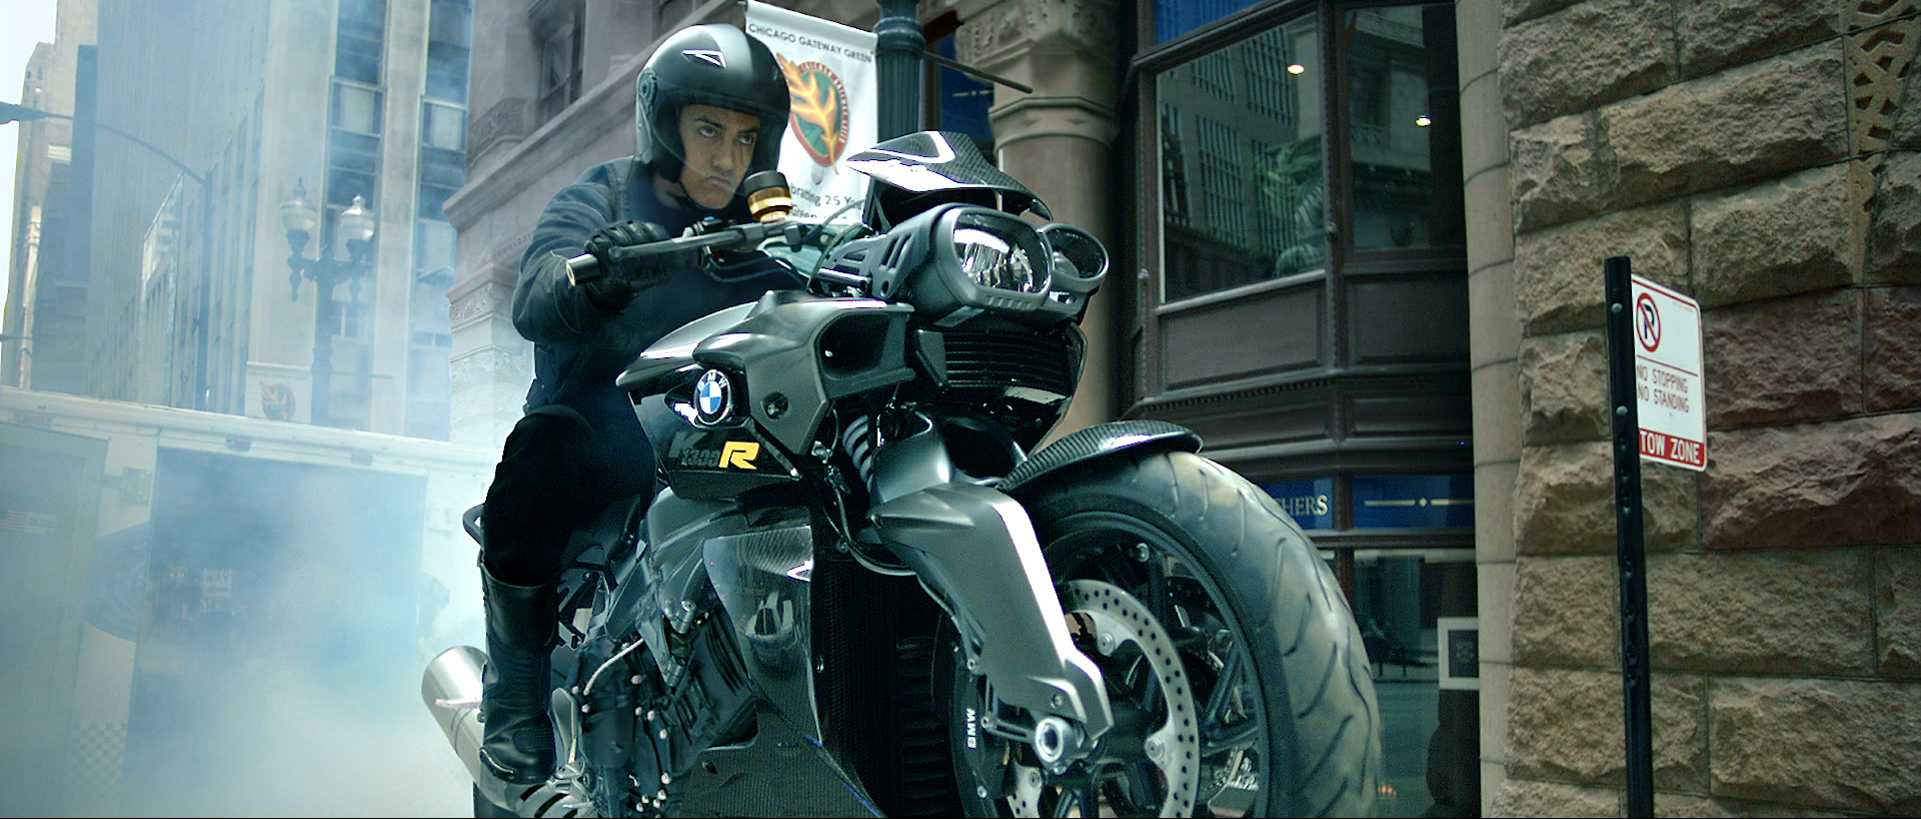 Bmw S1000r Dhoom3